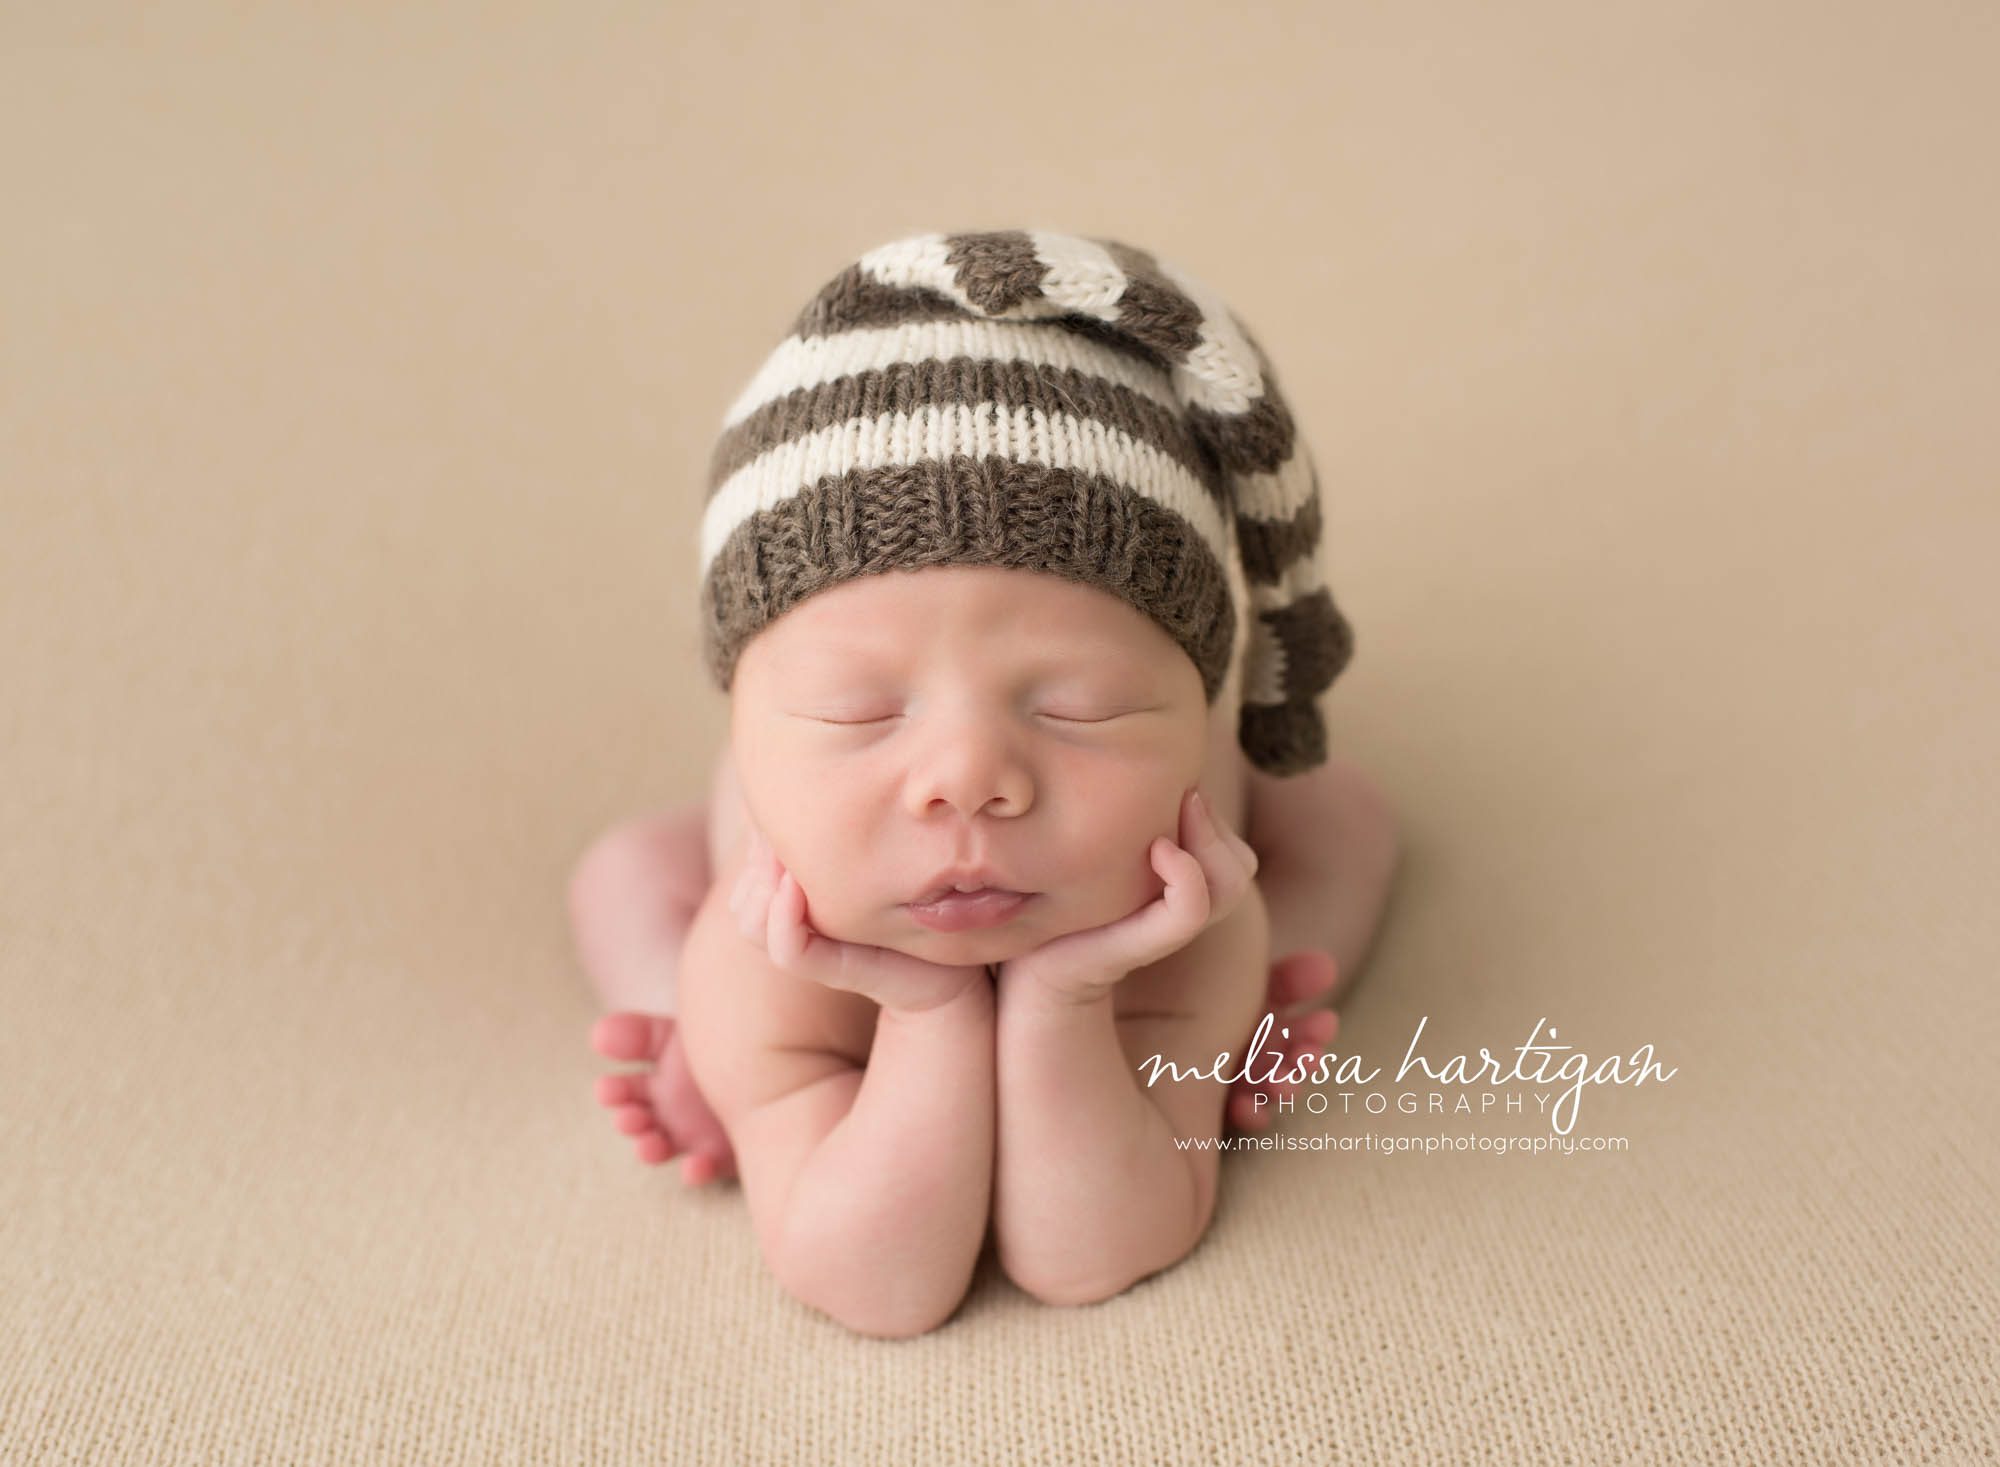 Melissa Hartigan Photography CT Newborn Photographer Taave CT Newborn Session baby boy sleeping in froggy pose wearing cream and gray striped knit hat